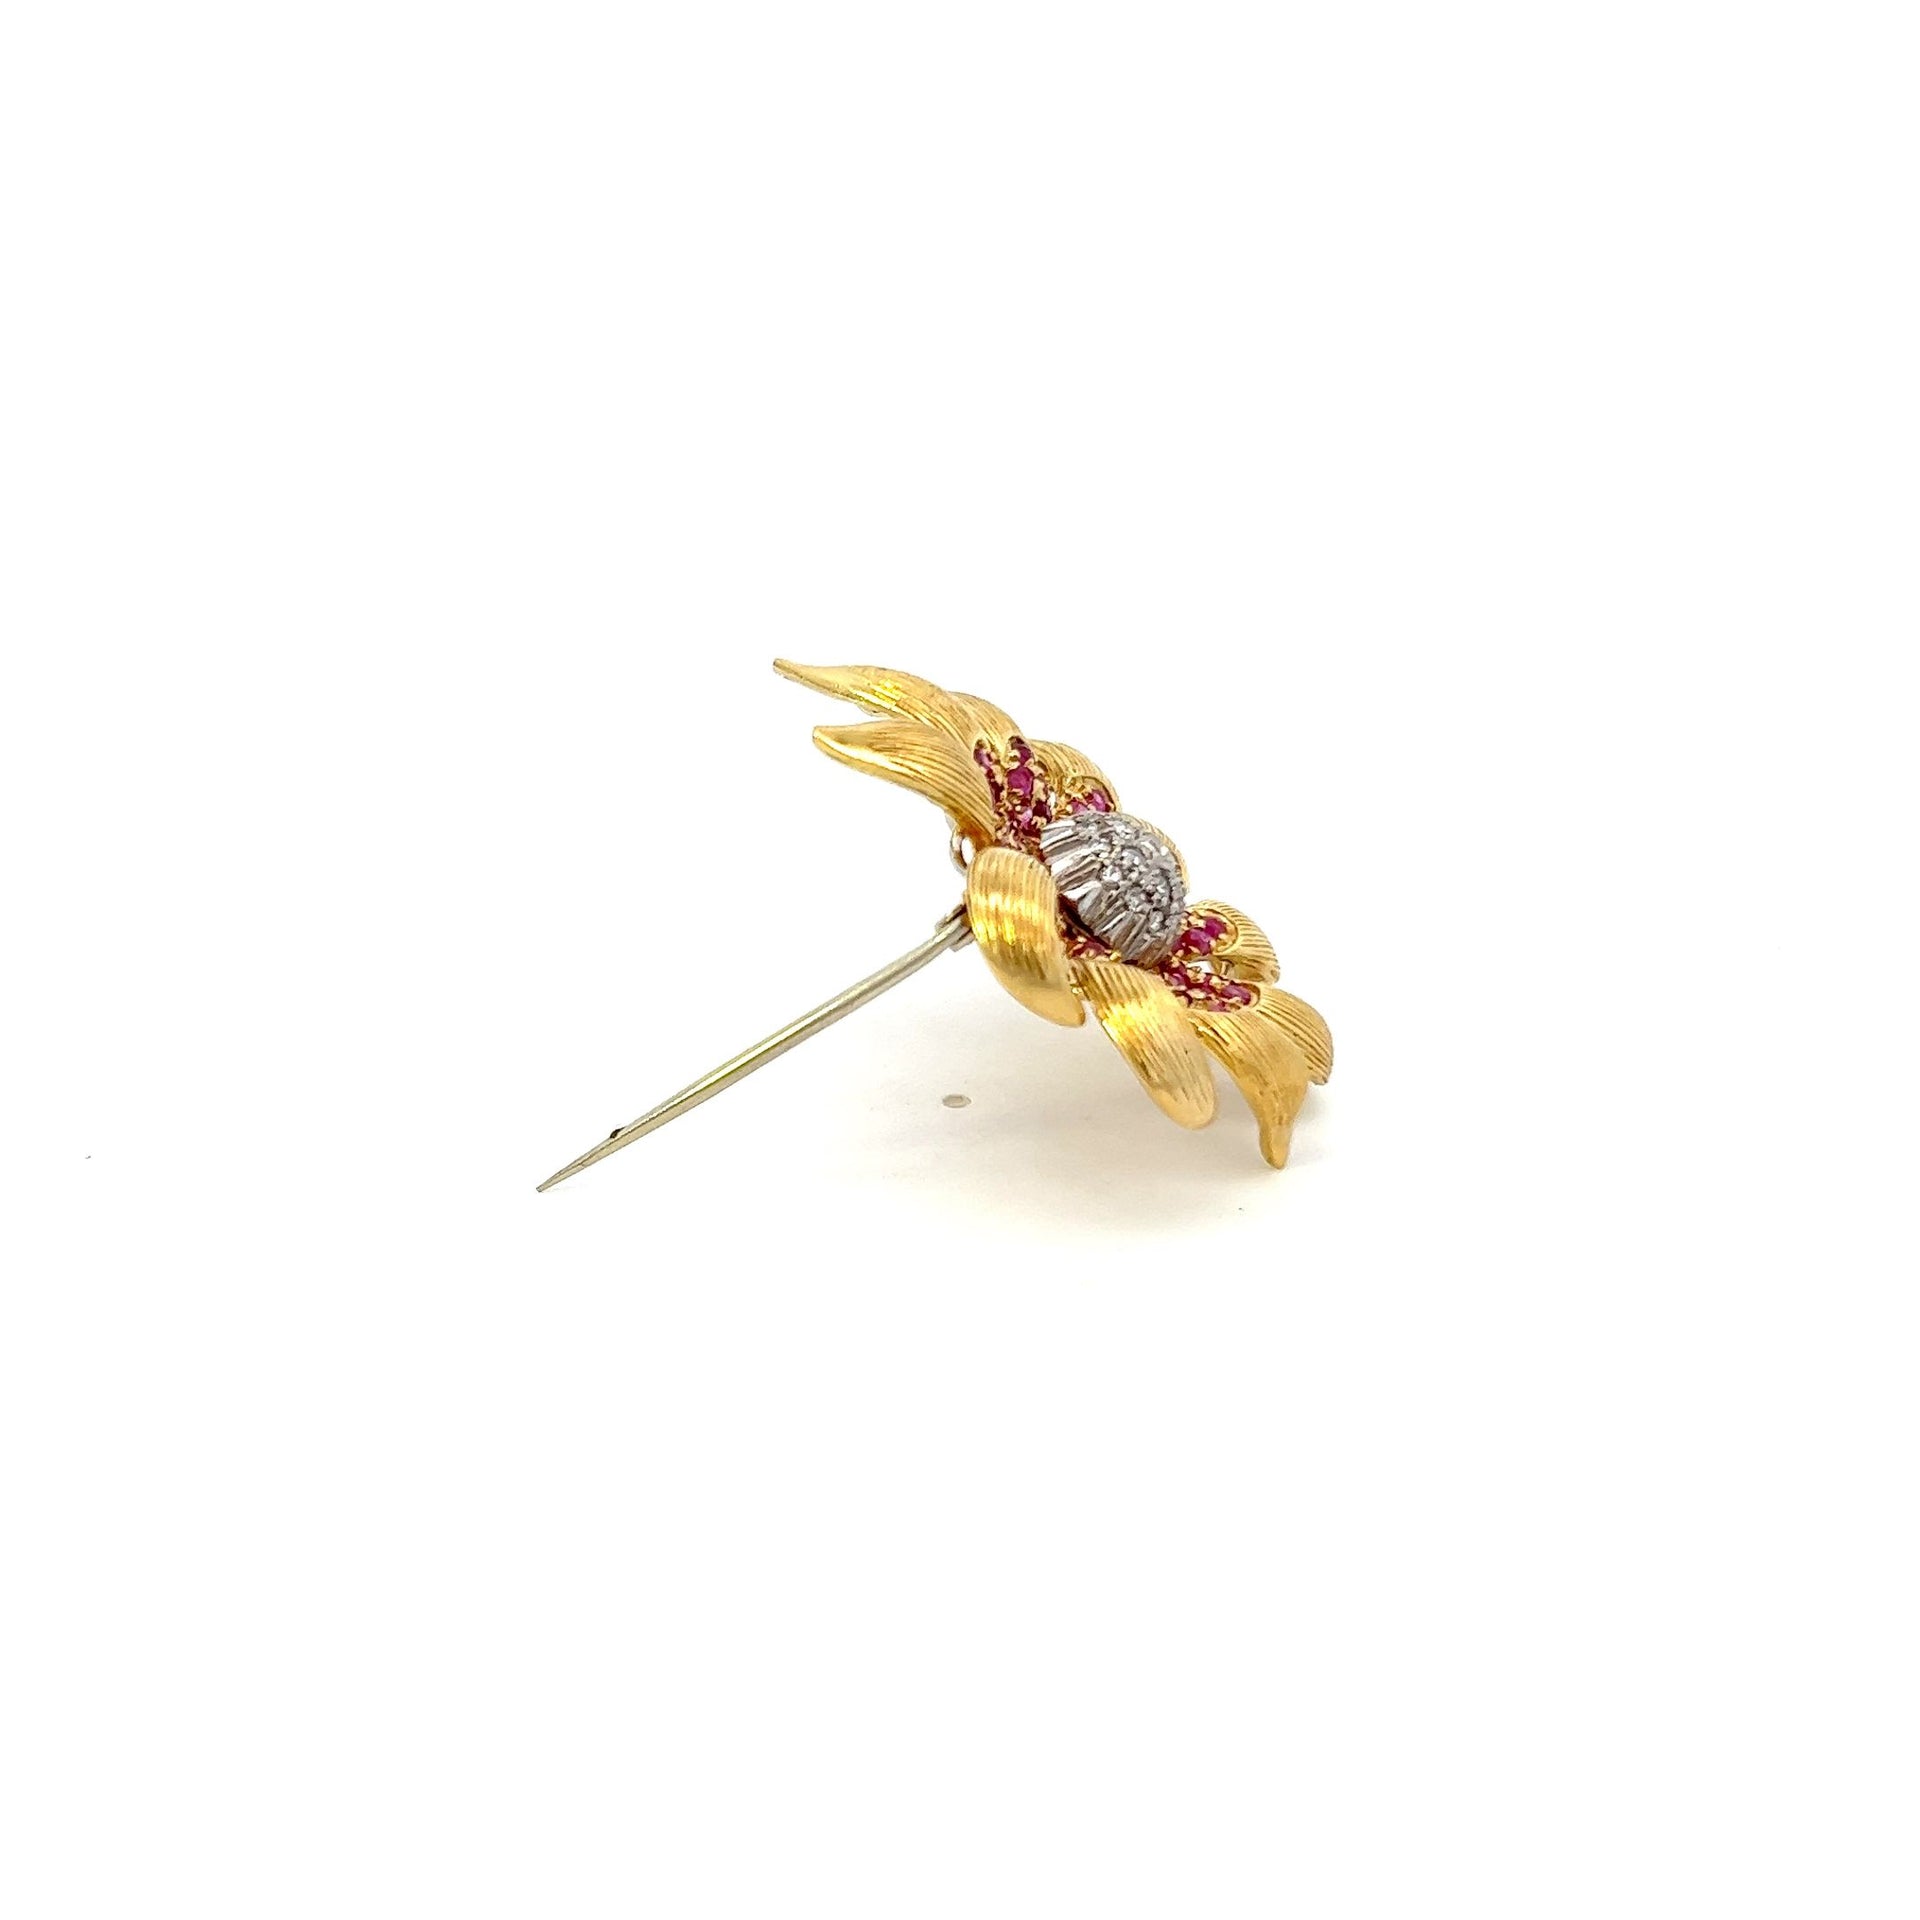 Rare Estate 18KT Yellow Gold Ruby And Diamond Pin